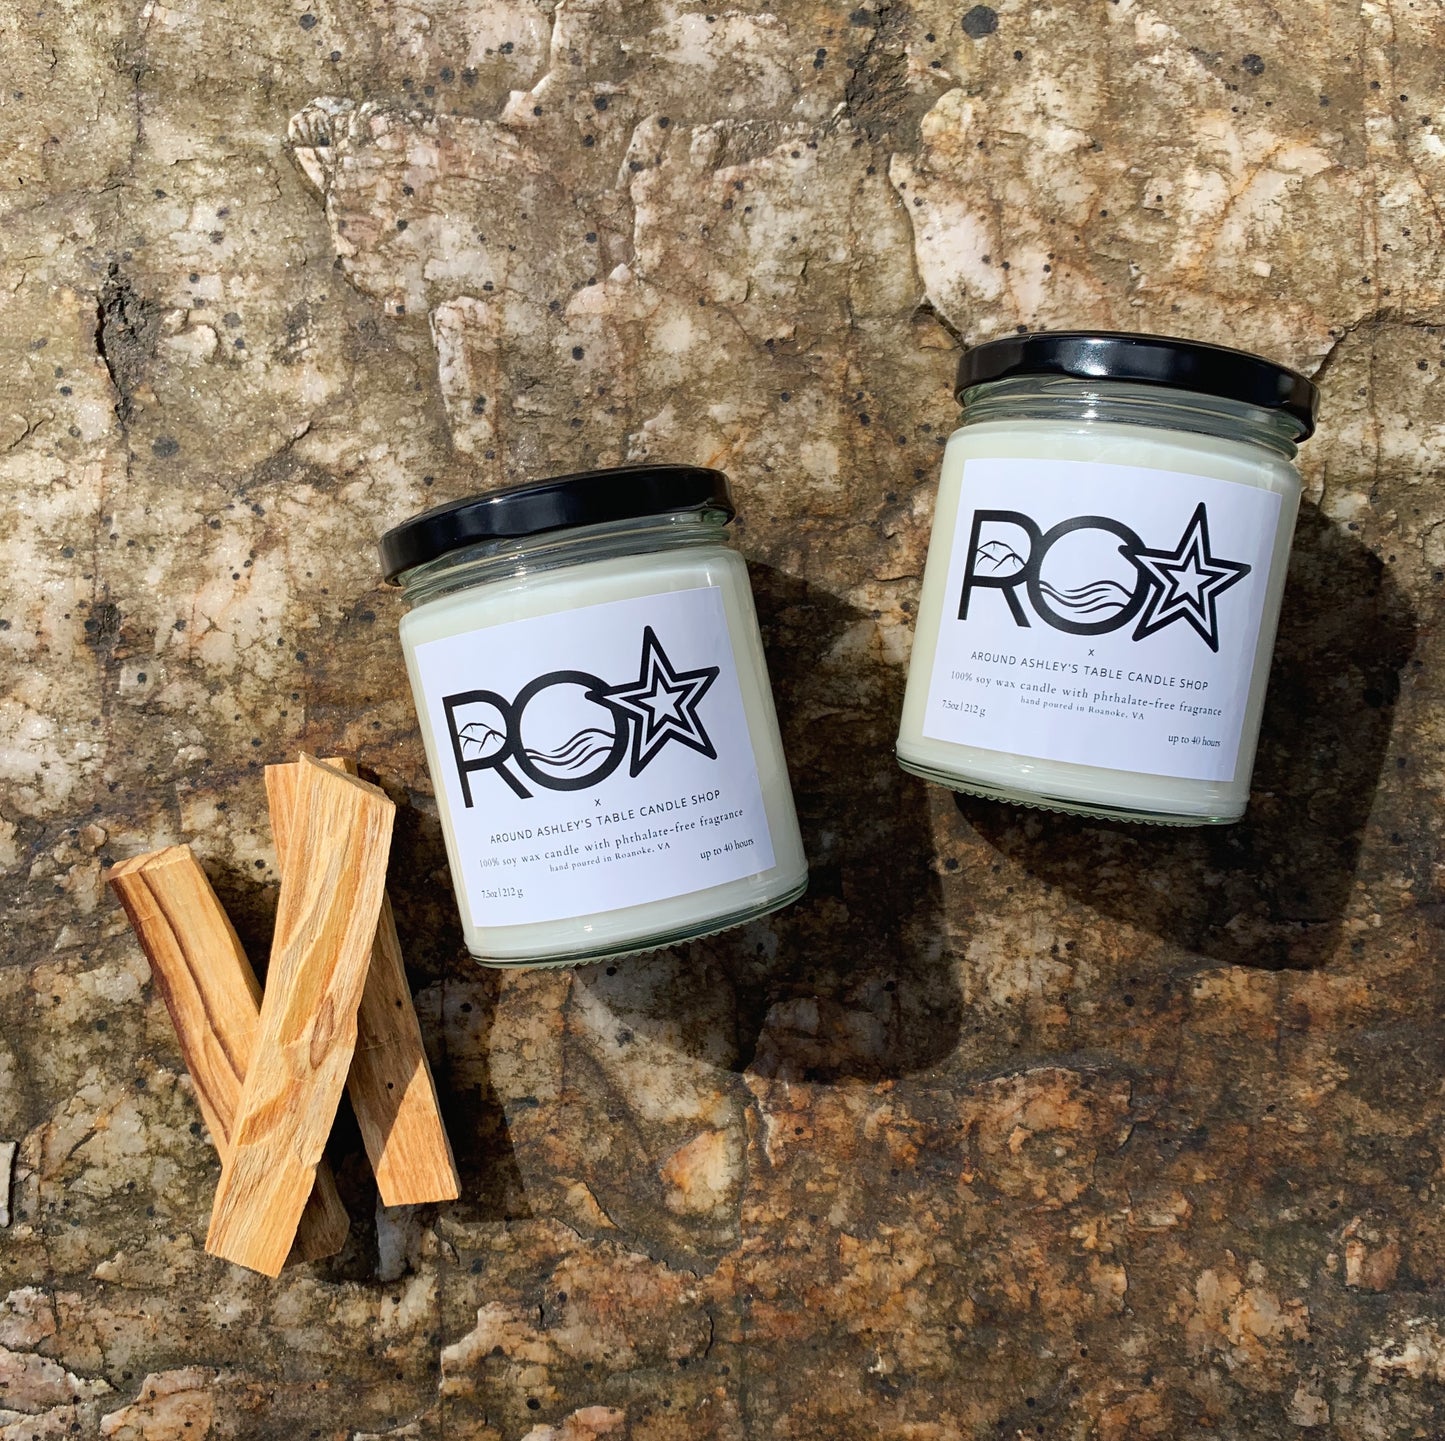 Roanoke Lifestyle - ROA Scented Candles